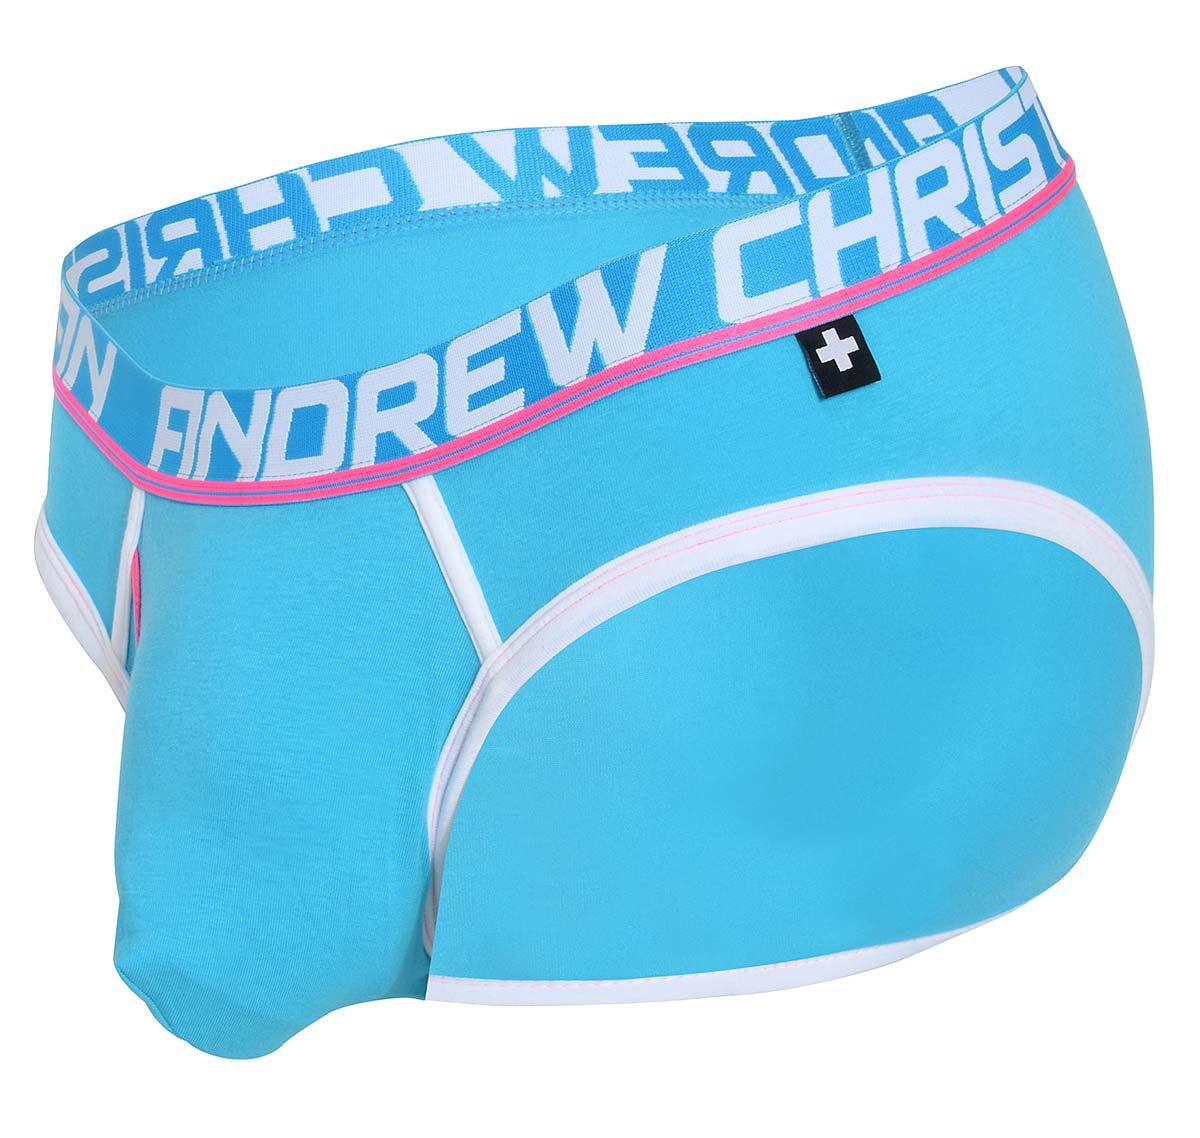 Andrew Christian Slip FLY TAGLESS BRIEF w/ ALMOST NAKED 92049, bleu